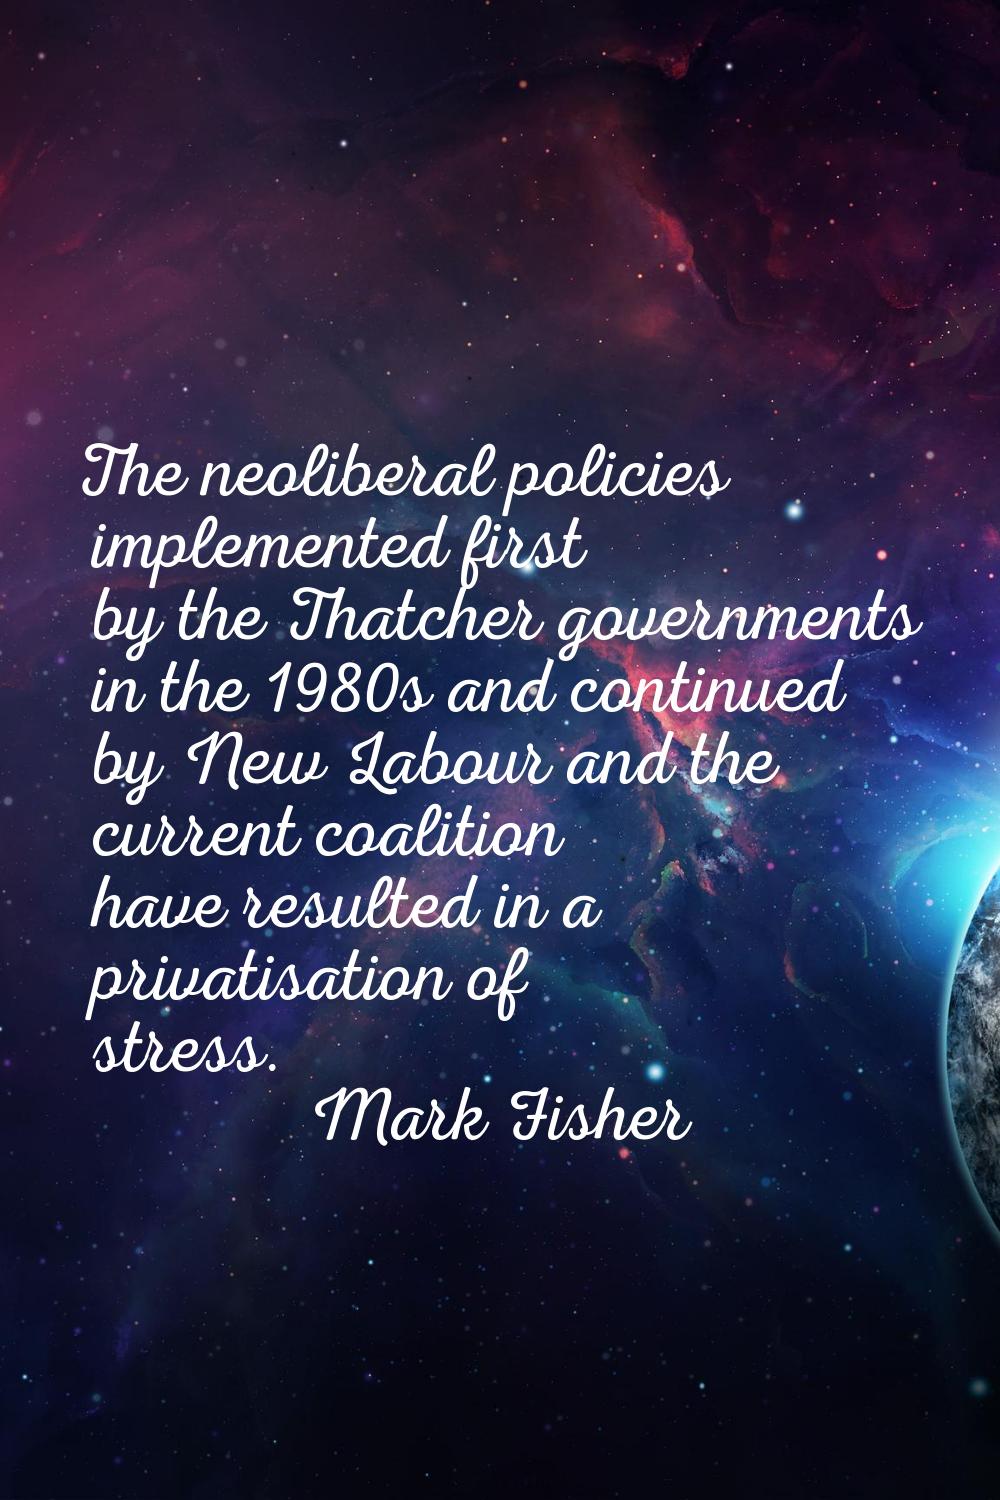 The neoliberal policies implemented first by the Thatcher governments in the 1980s and continued by